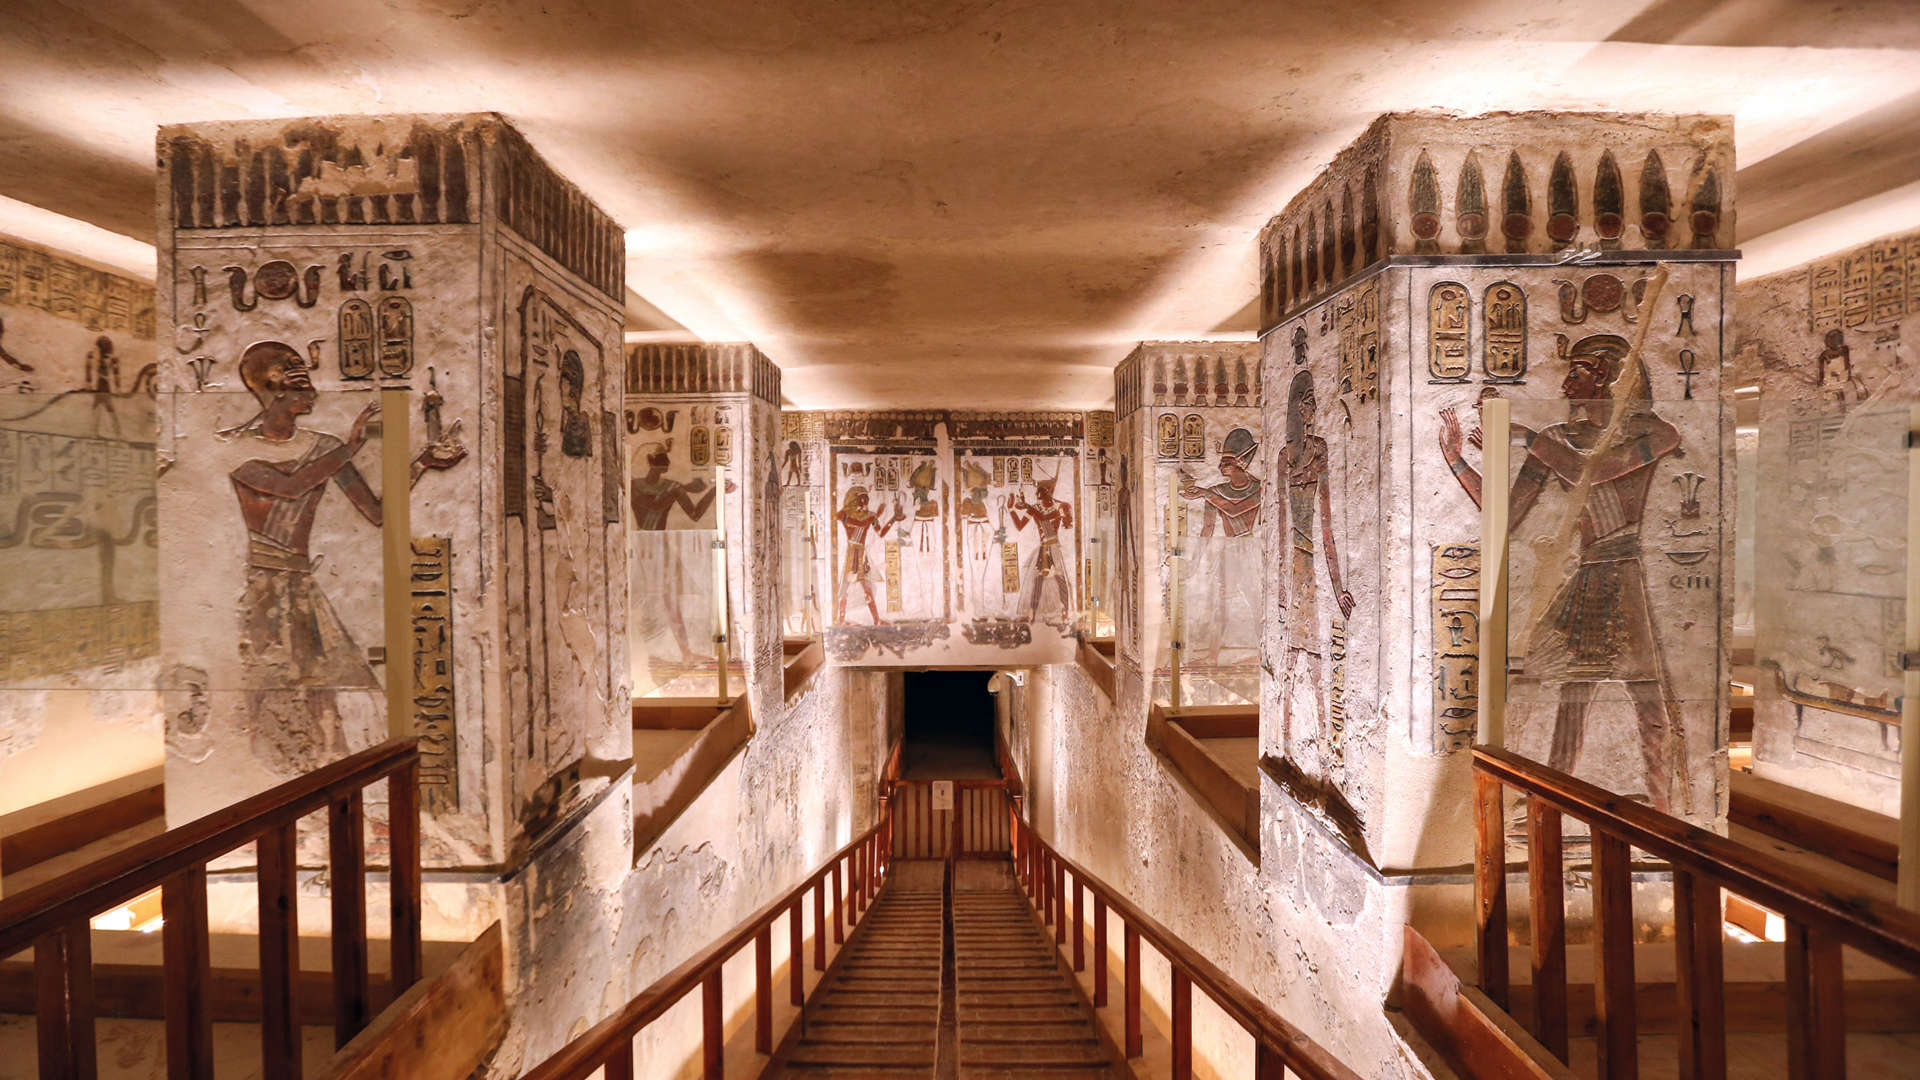 Tomb In Valley Of The Kings, Luxor, Egypt